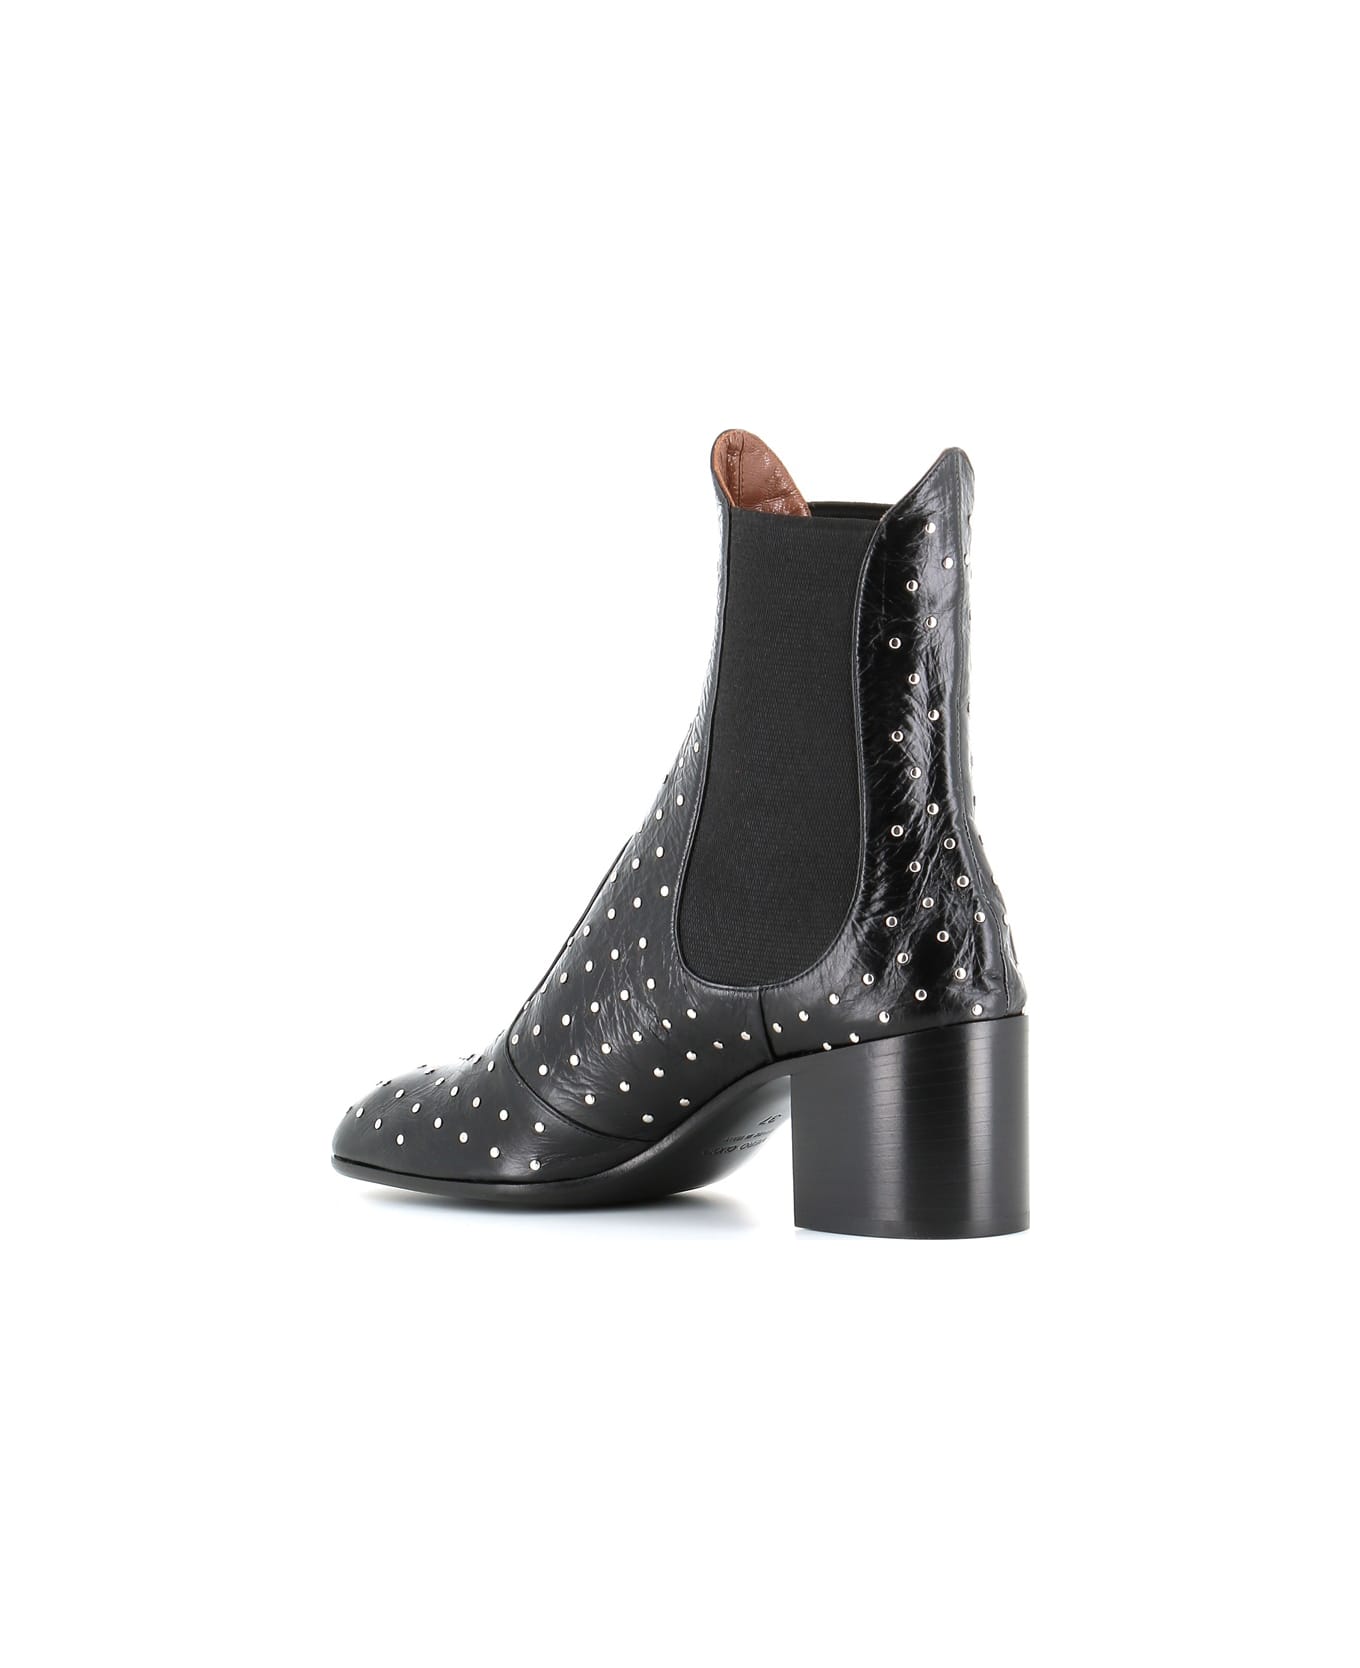 Laurence Dacade Boot Angie - Black